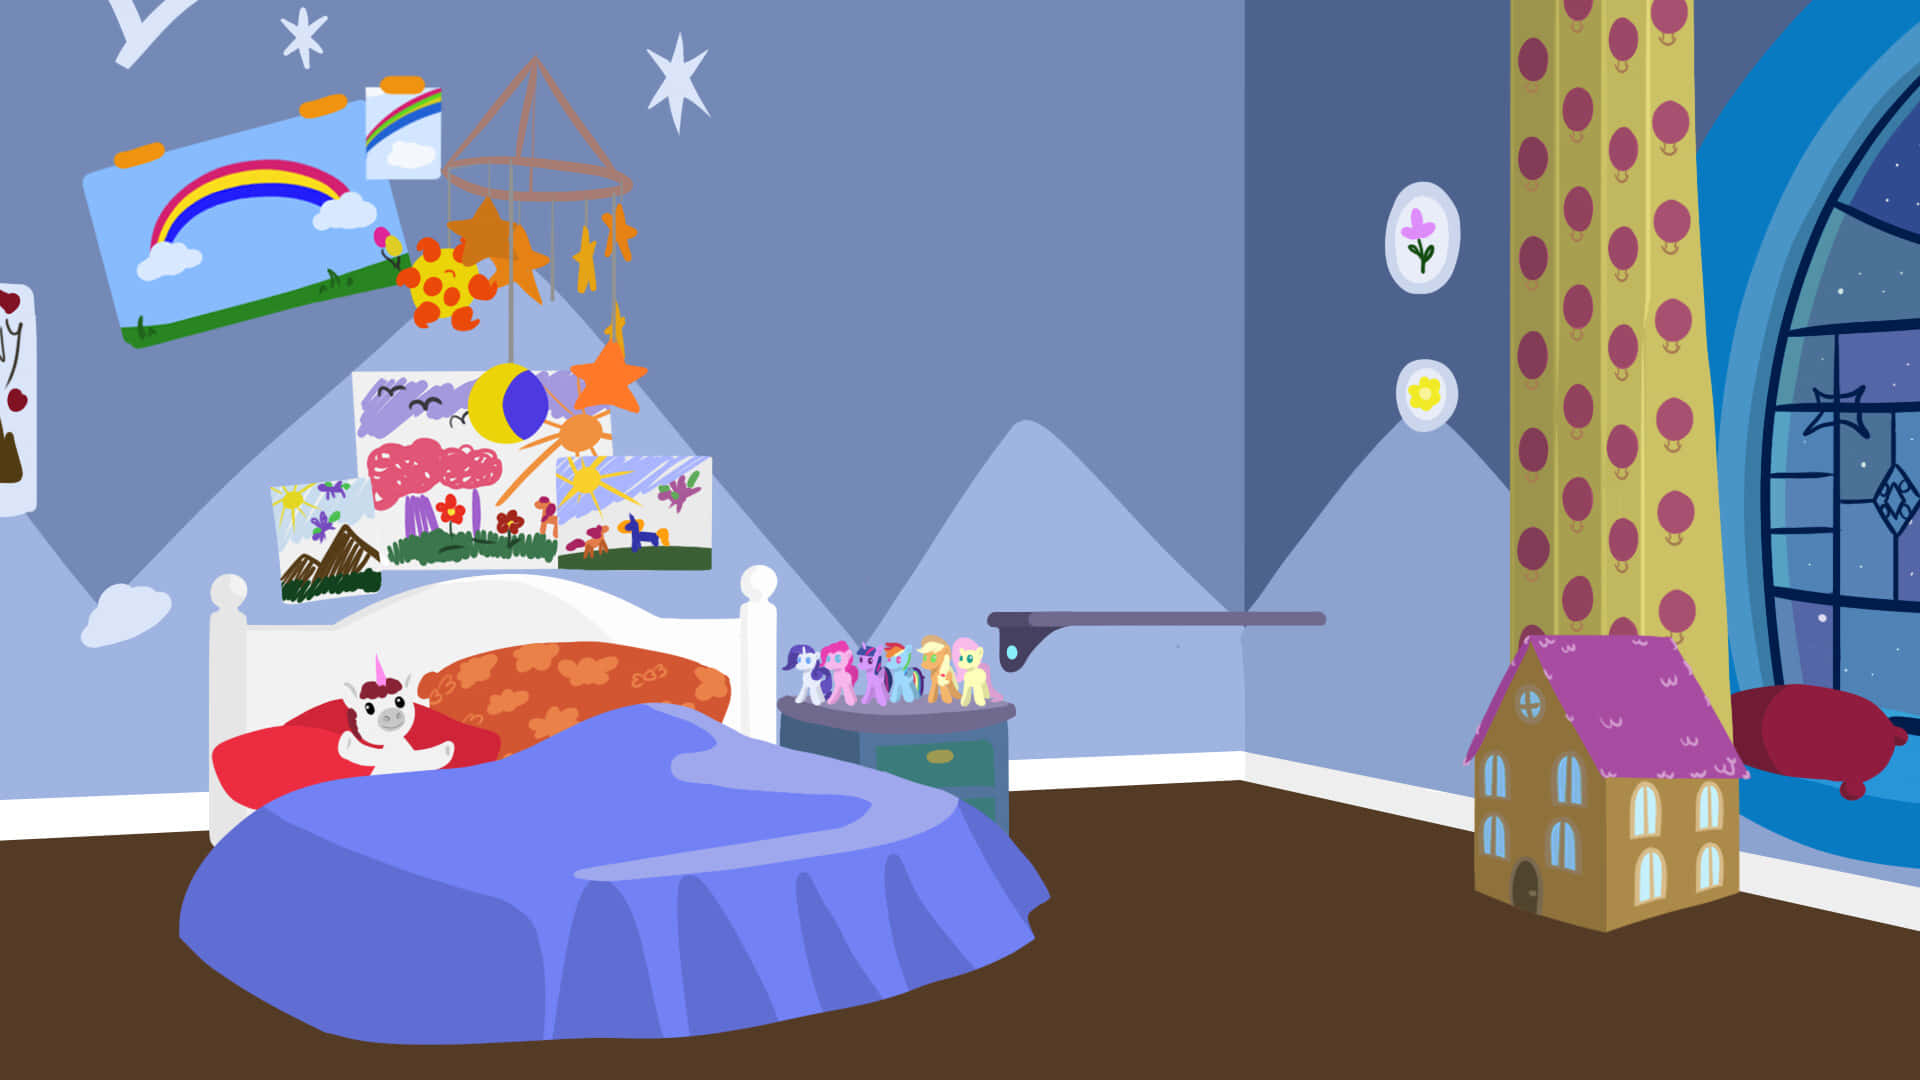 MLP Background Room With Pony Dolls